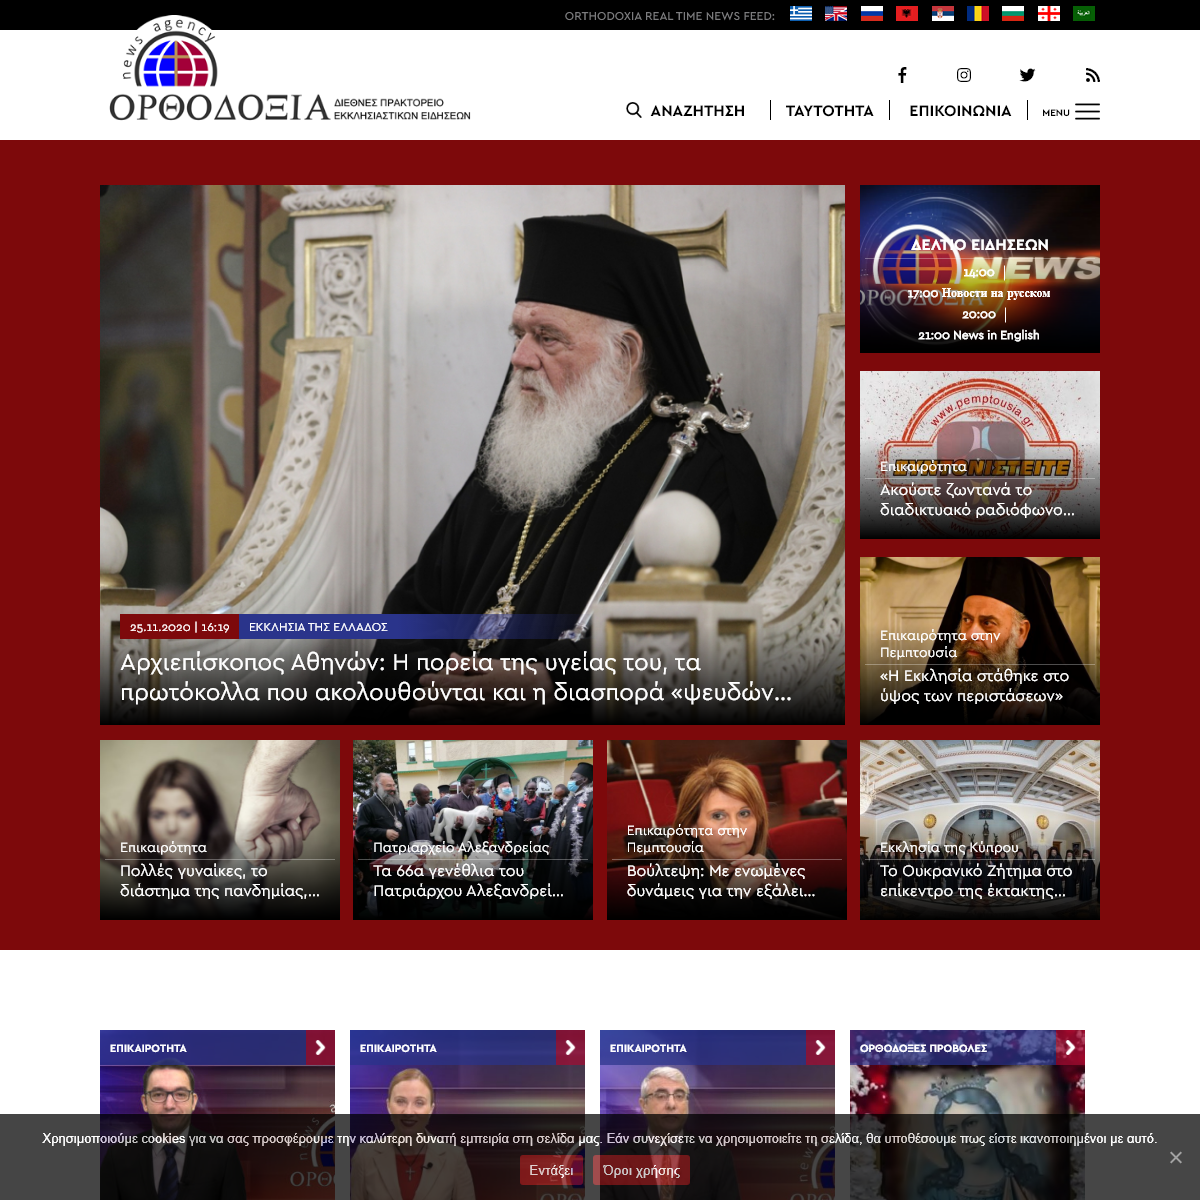 A complete backup of orthodoxianewsagency.gr